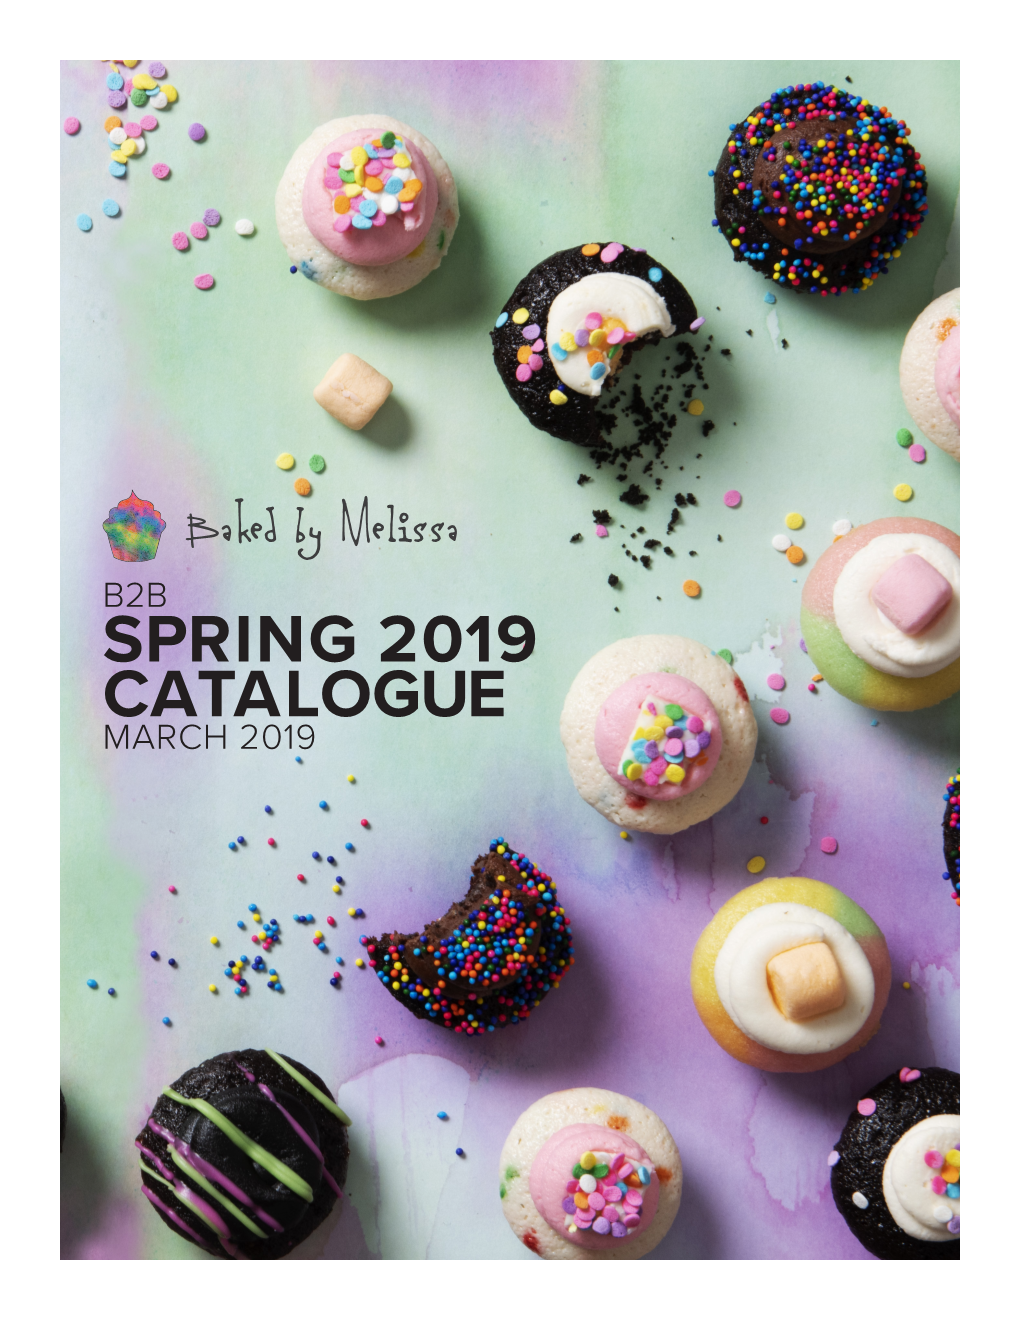 SPRING 2019 CATALOGUE MARCH 2019 HANDCRAFTED Here at Baked by Melissa, Every Bite-Size Cupcake and Macaron We Have Is Made Completely by Hand